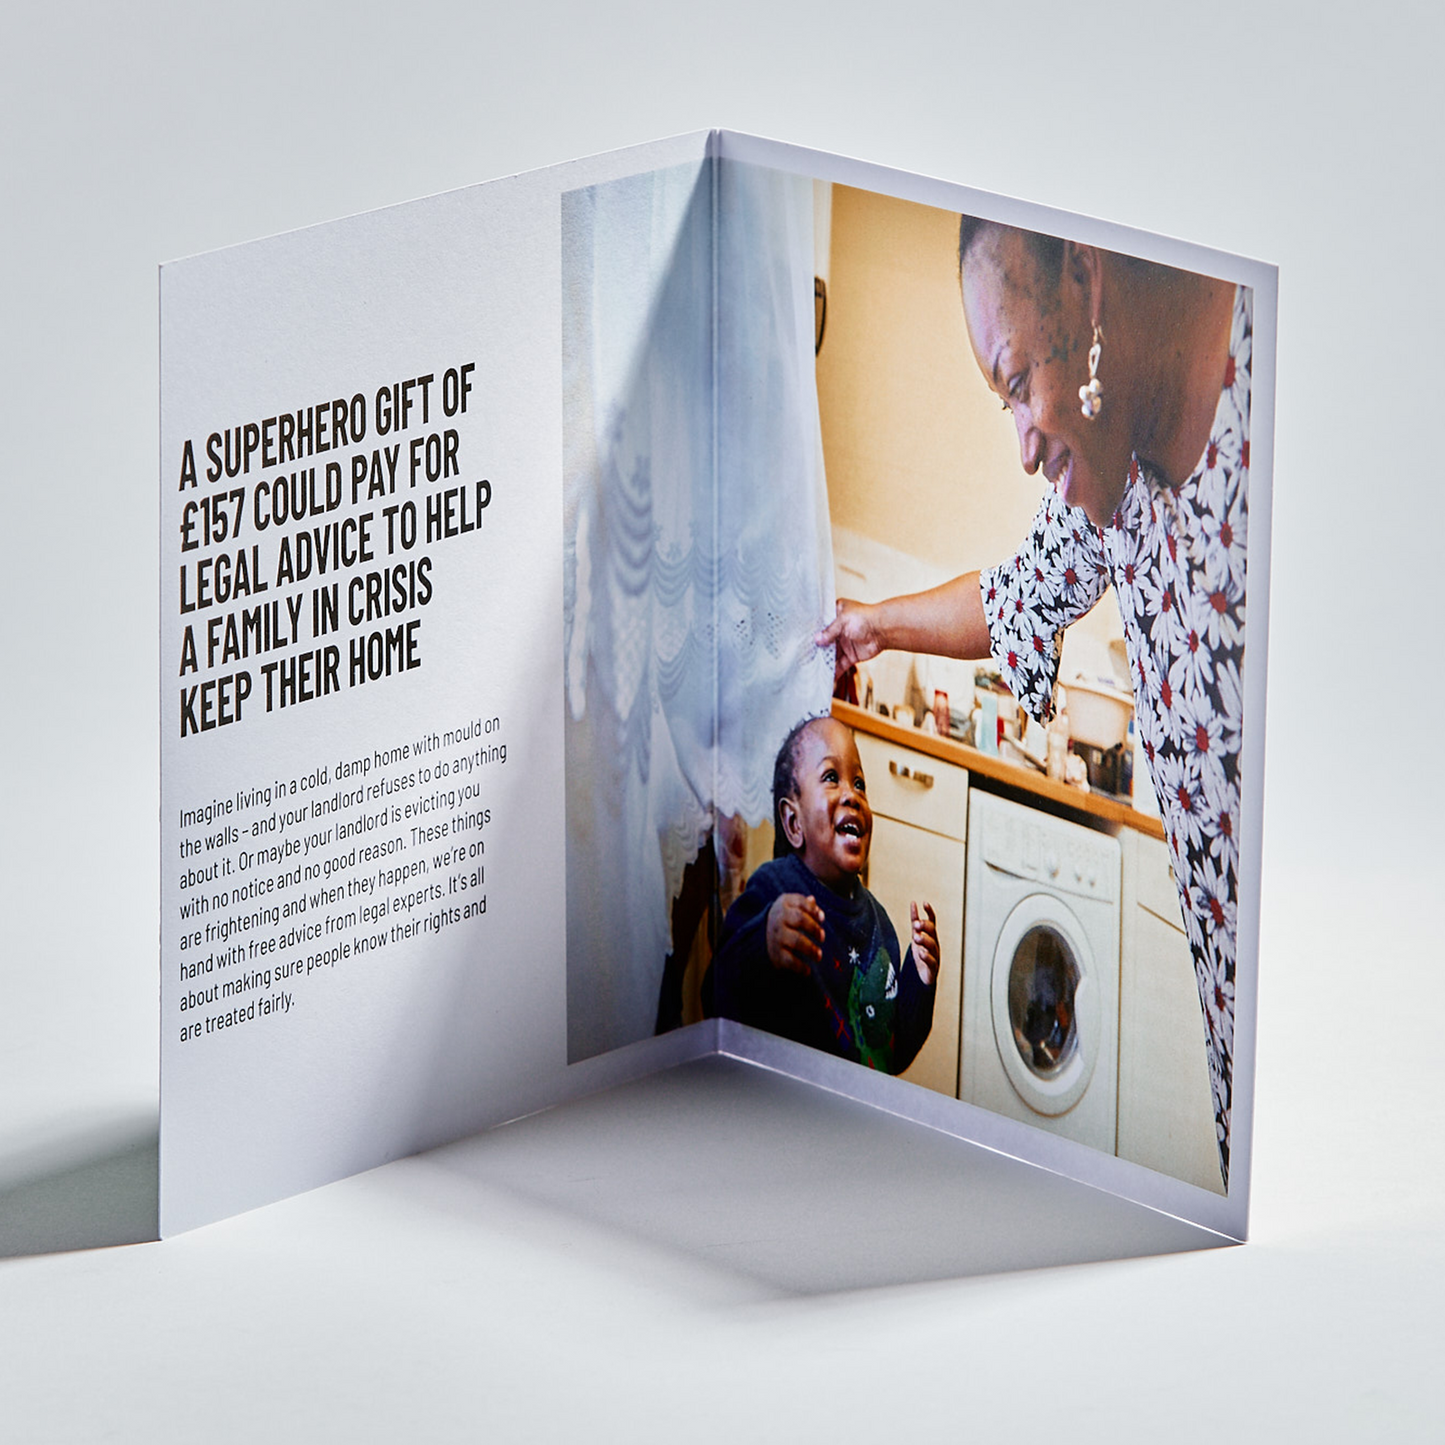 Inside of card with copy and image of a mother and young child smiling